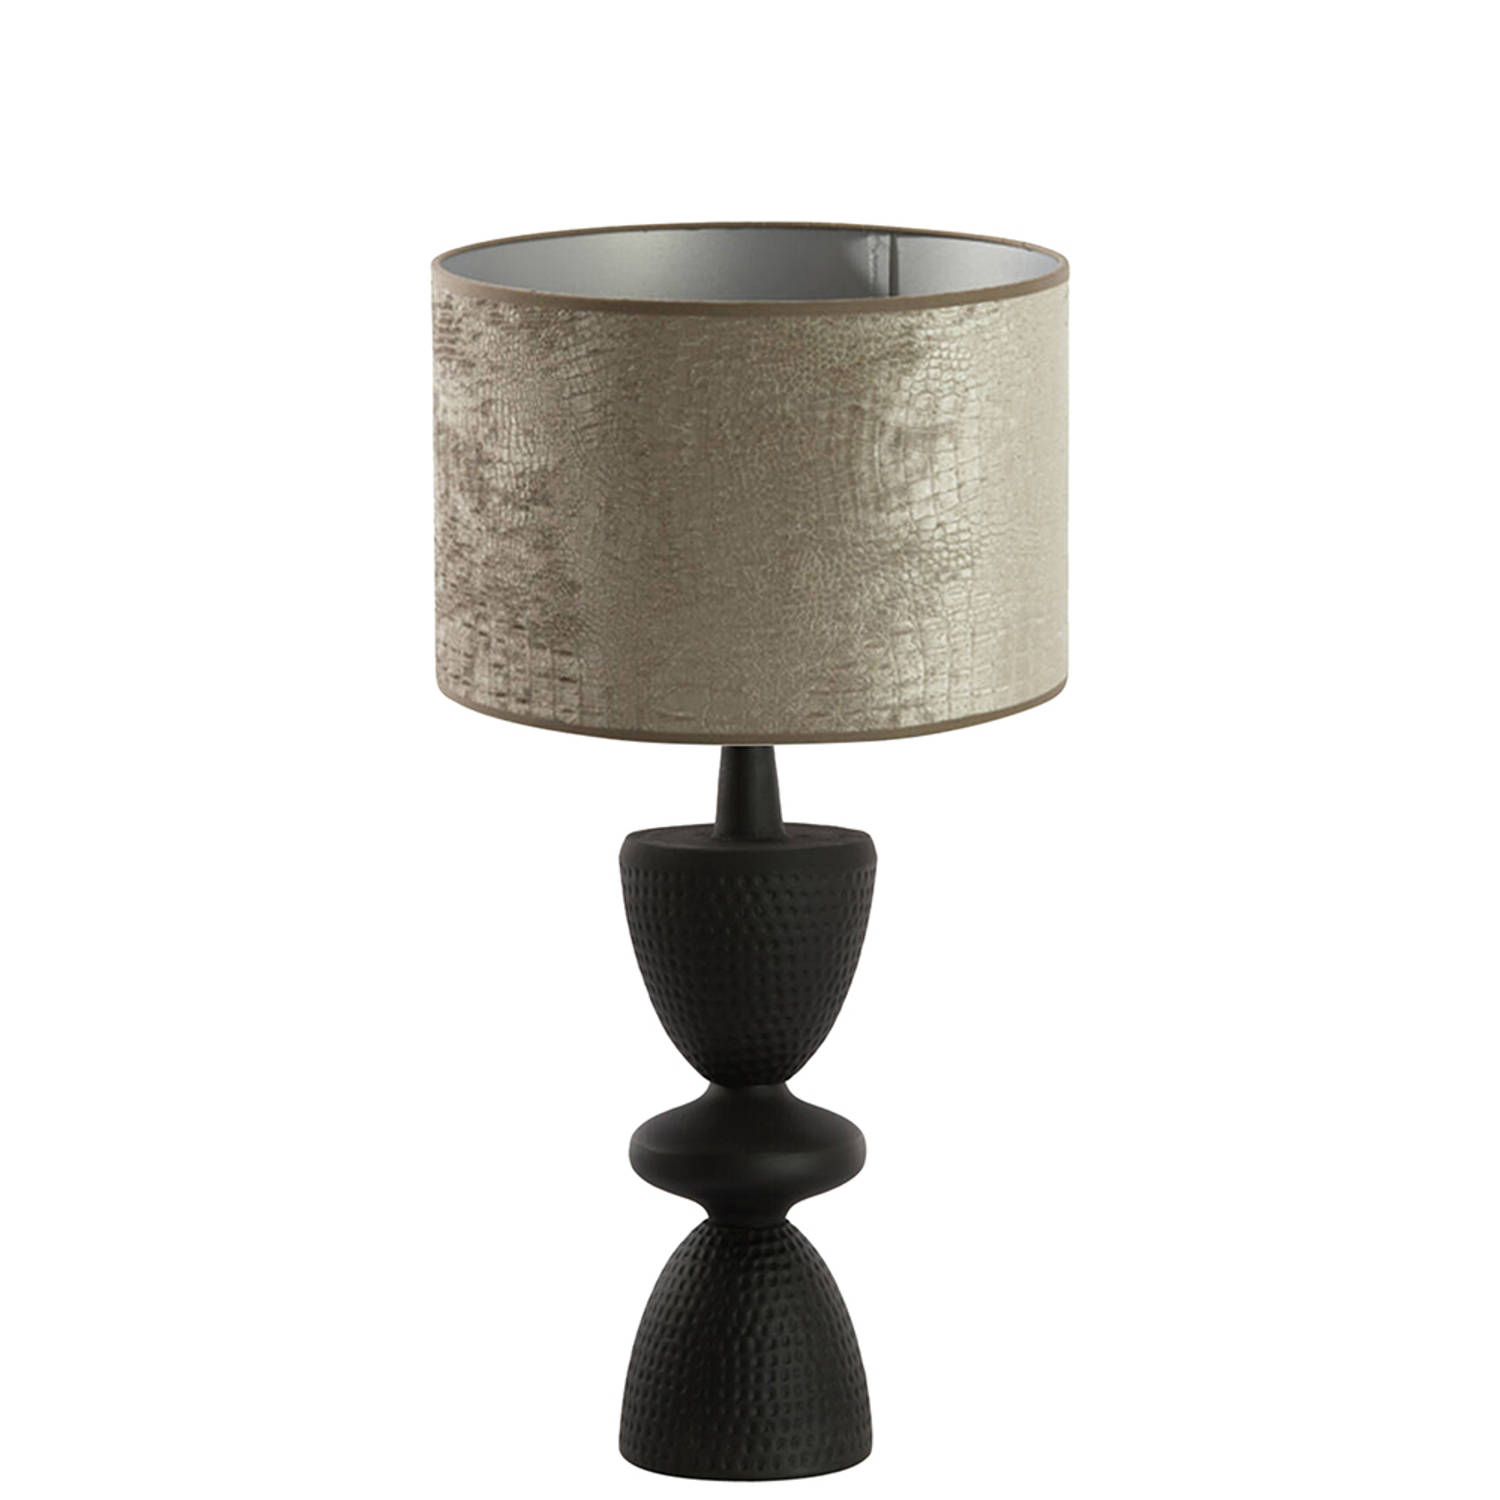 Light and Living Smith tafellamp - Ø 30 cm - E27 (grote fitting) - zilver